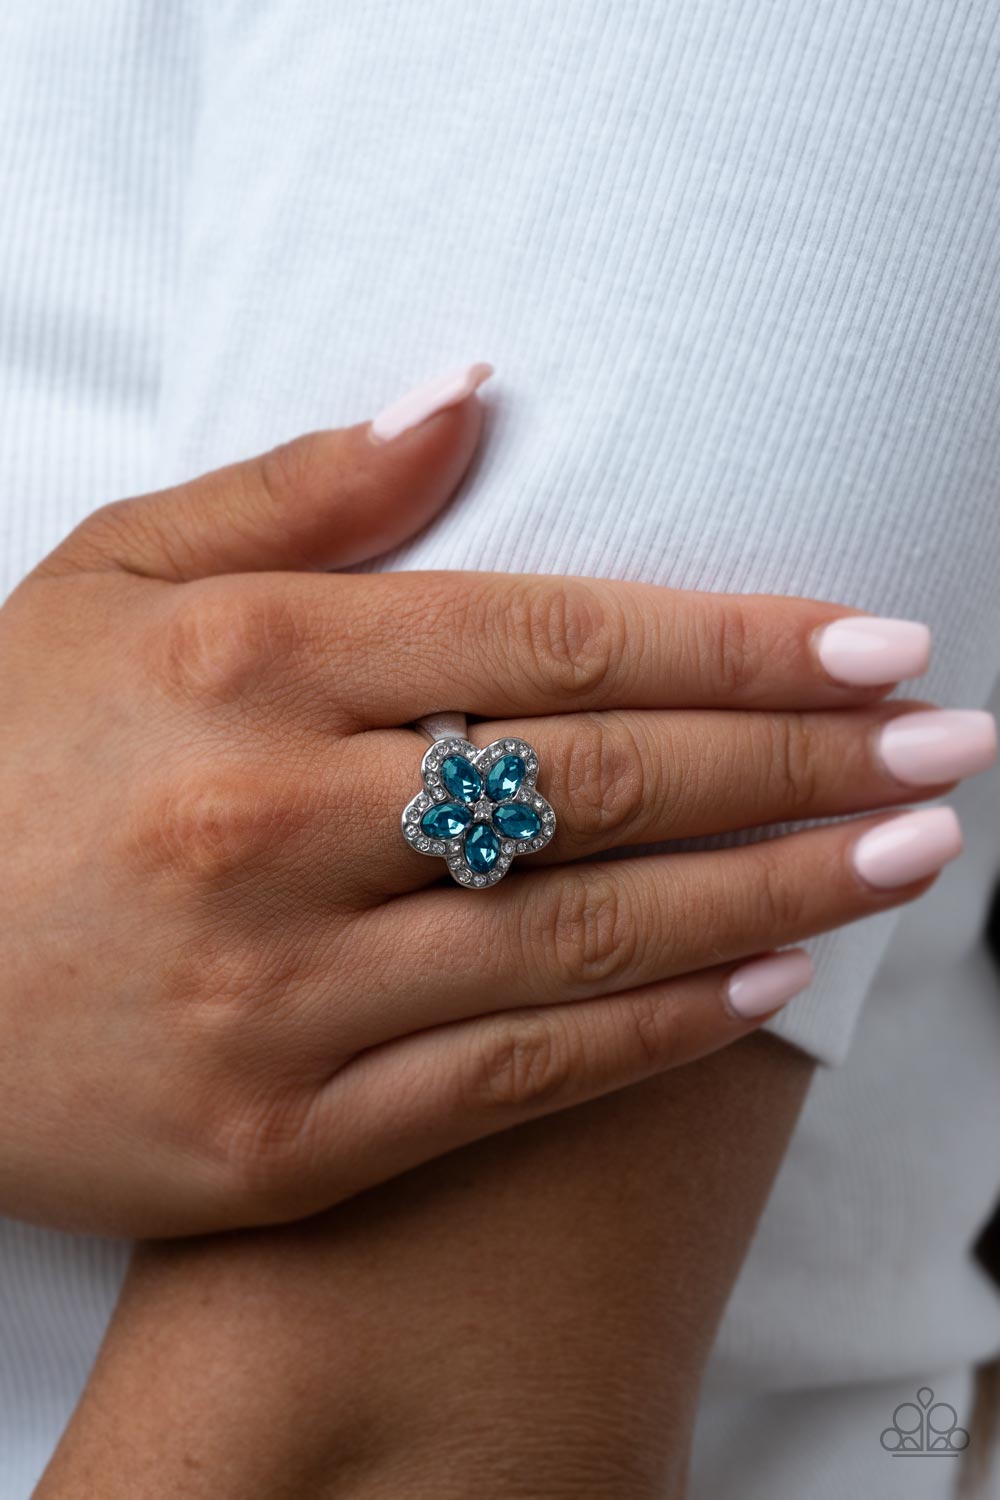 Efflorescent Envy - Blue and Silver Ring- Paparazzi Accessories